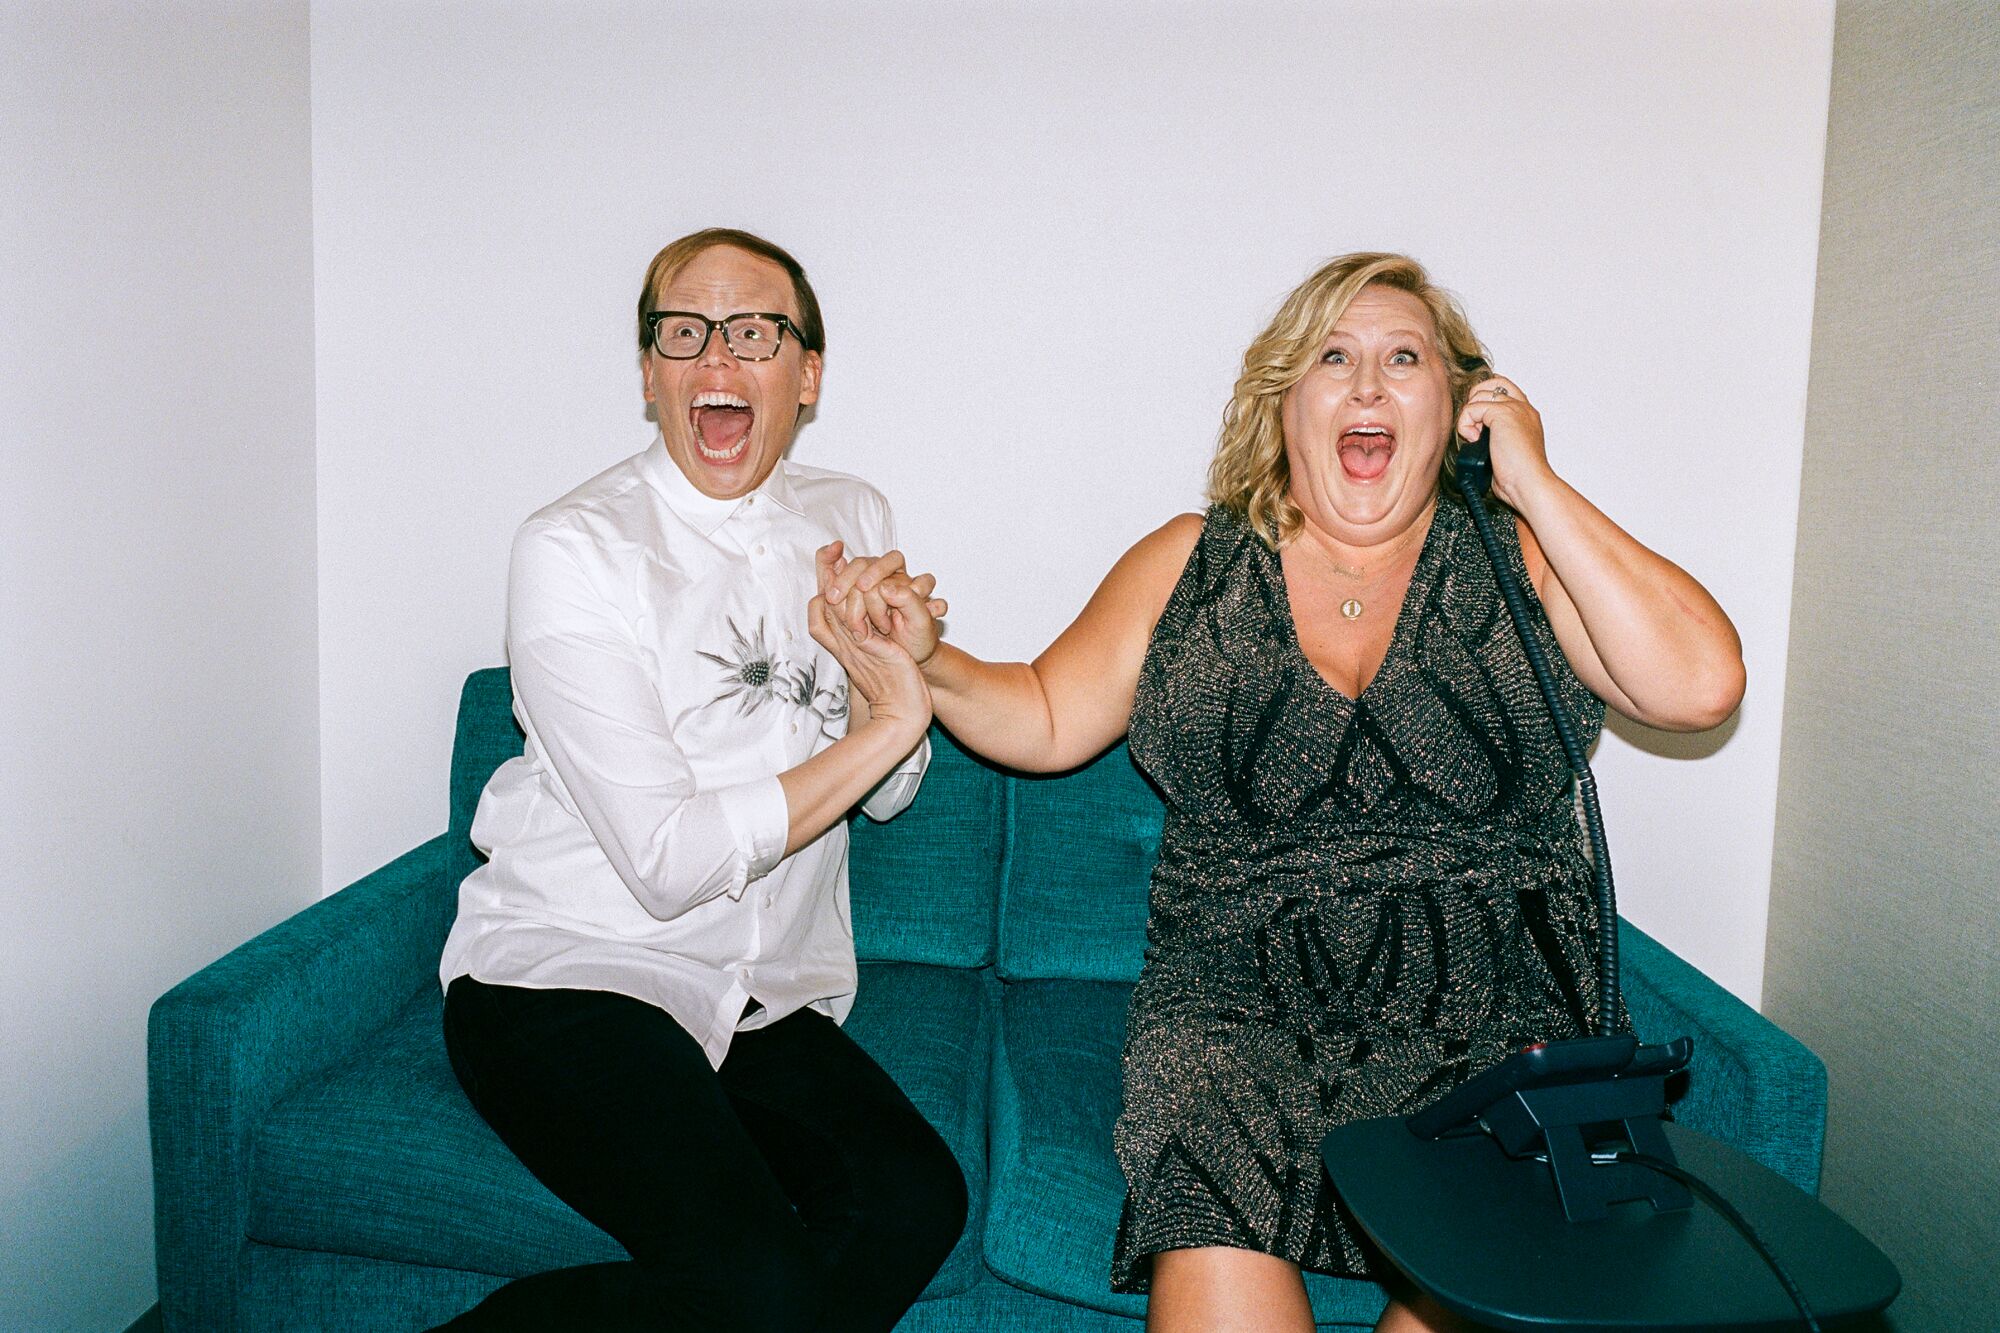 Jeff Hiller and Bridget Everett ramp up the excitement for a portrait.